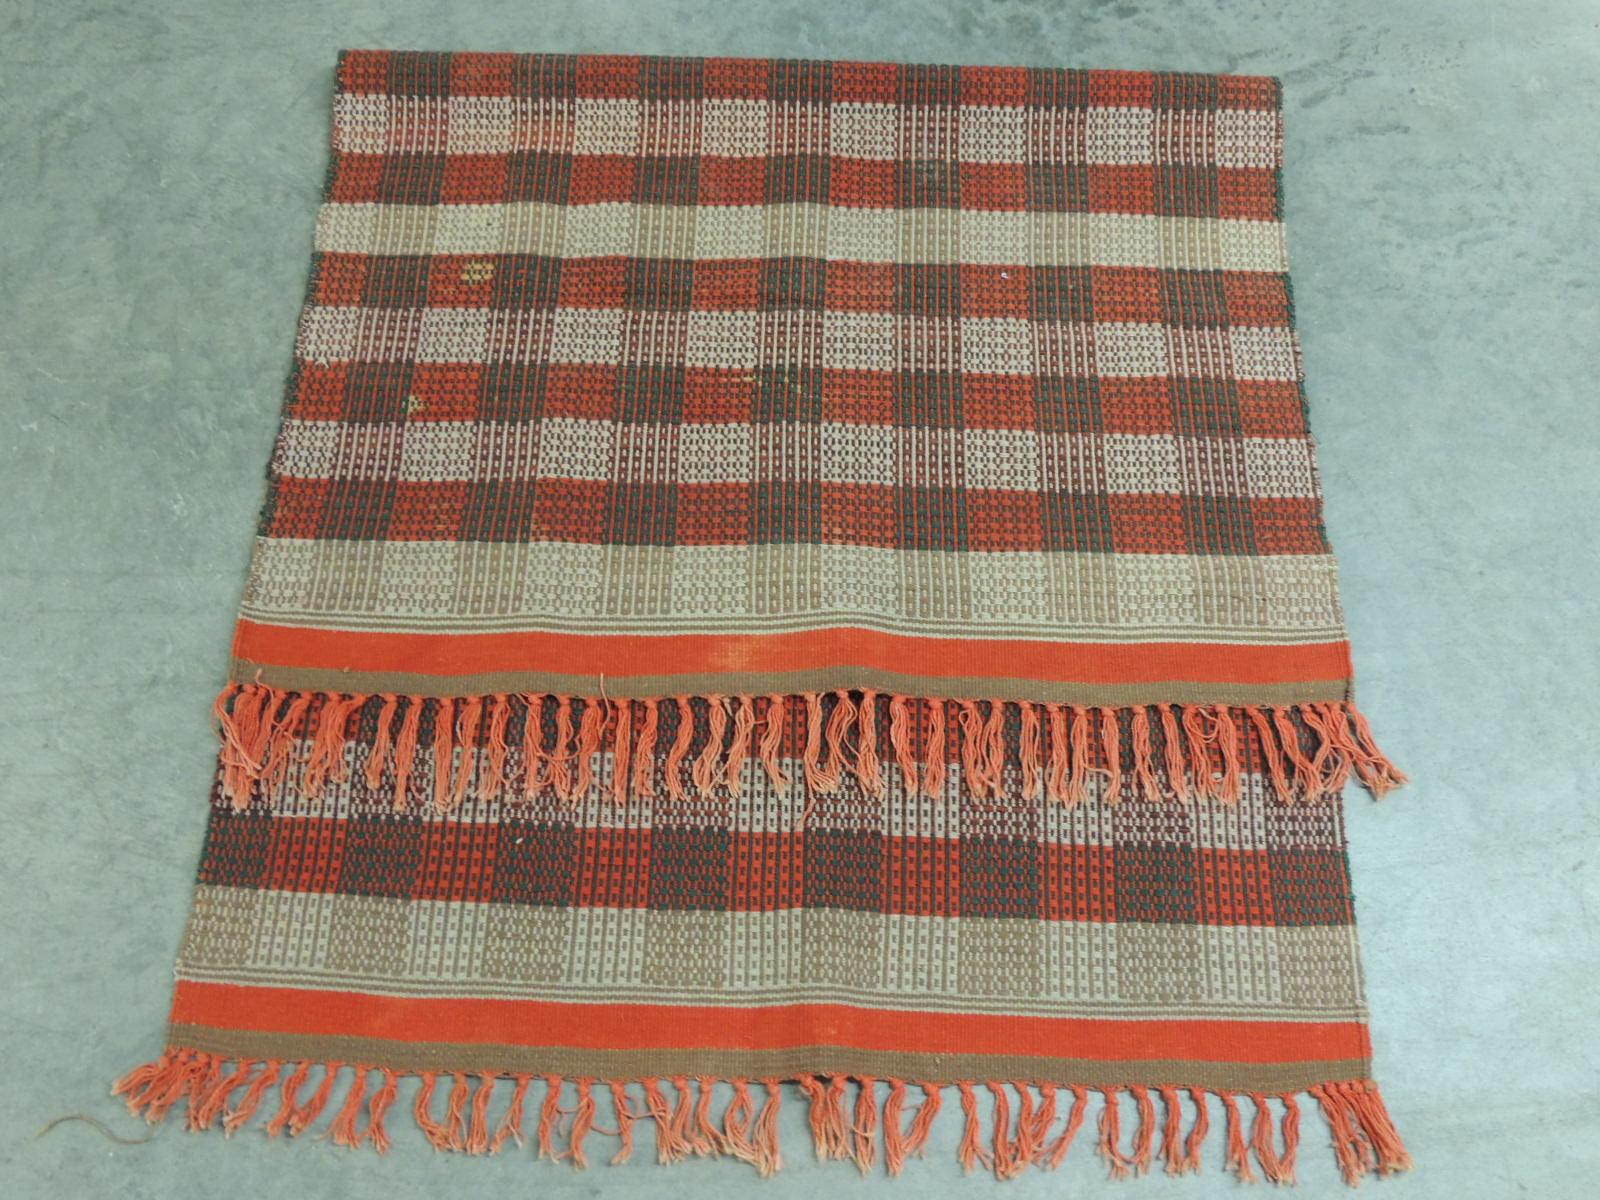 Hand-Woven Orange Plaid Indian Woven Rug For Sale